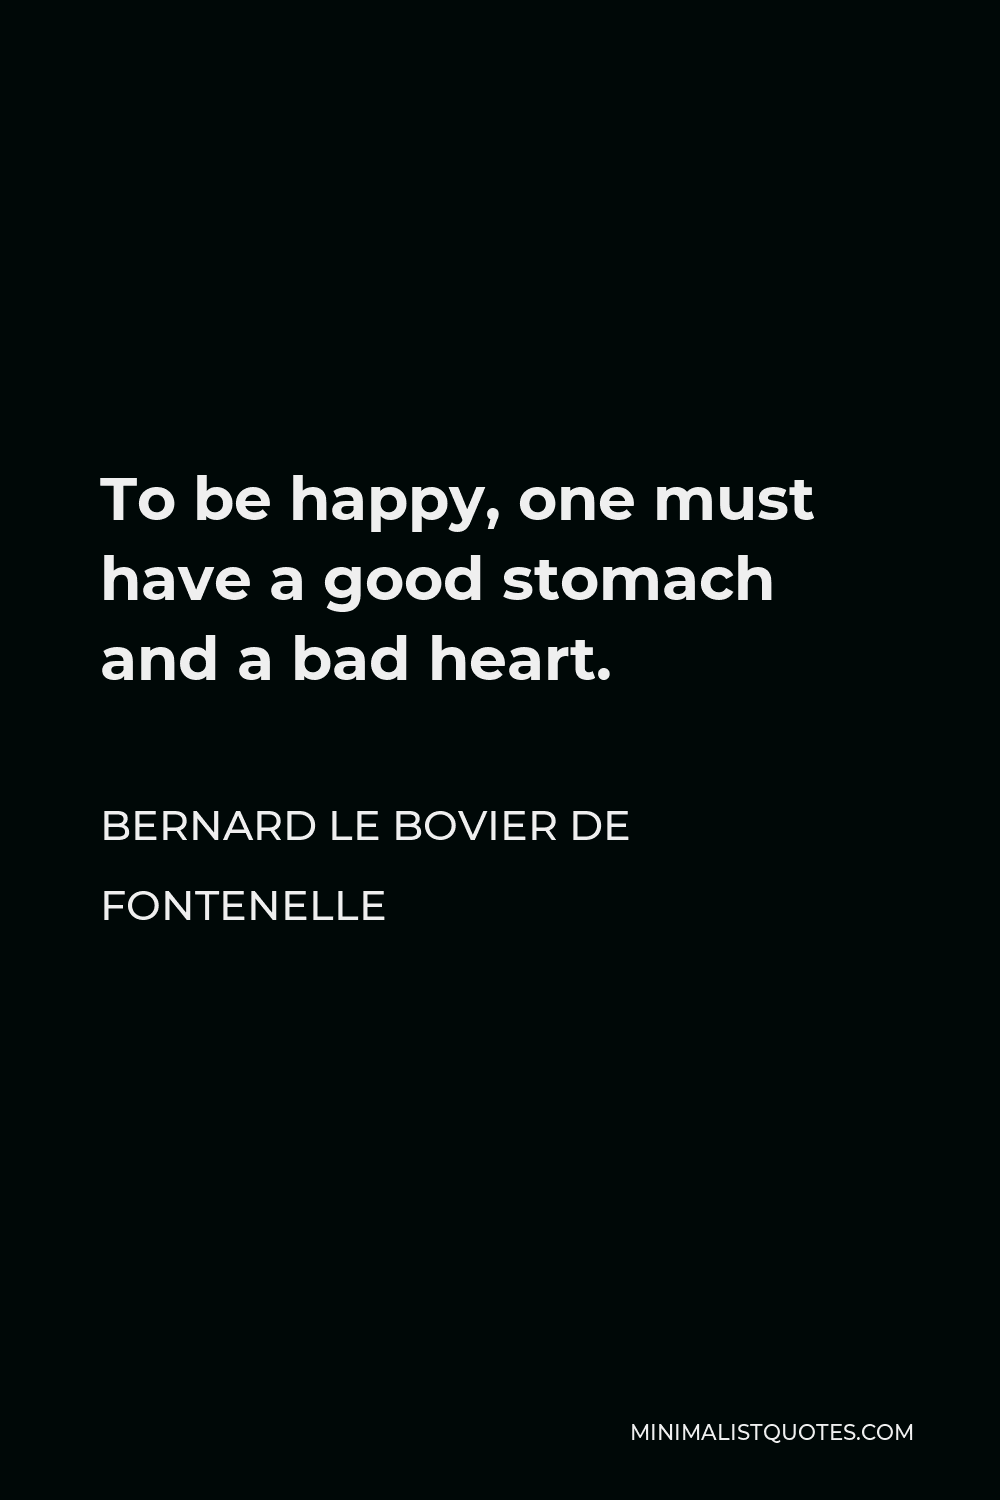 Bernard le Bovier de Fontenelle Quote - To be happy, one must have a good stomach and a bad heart.